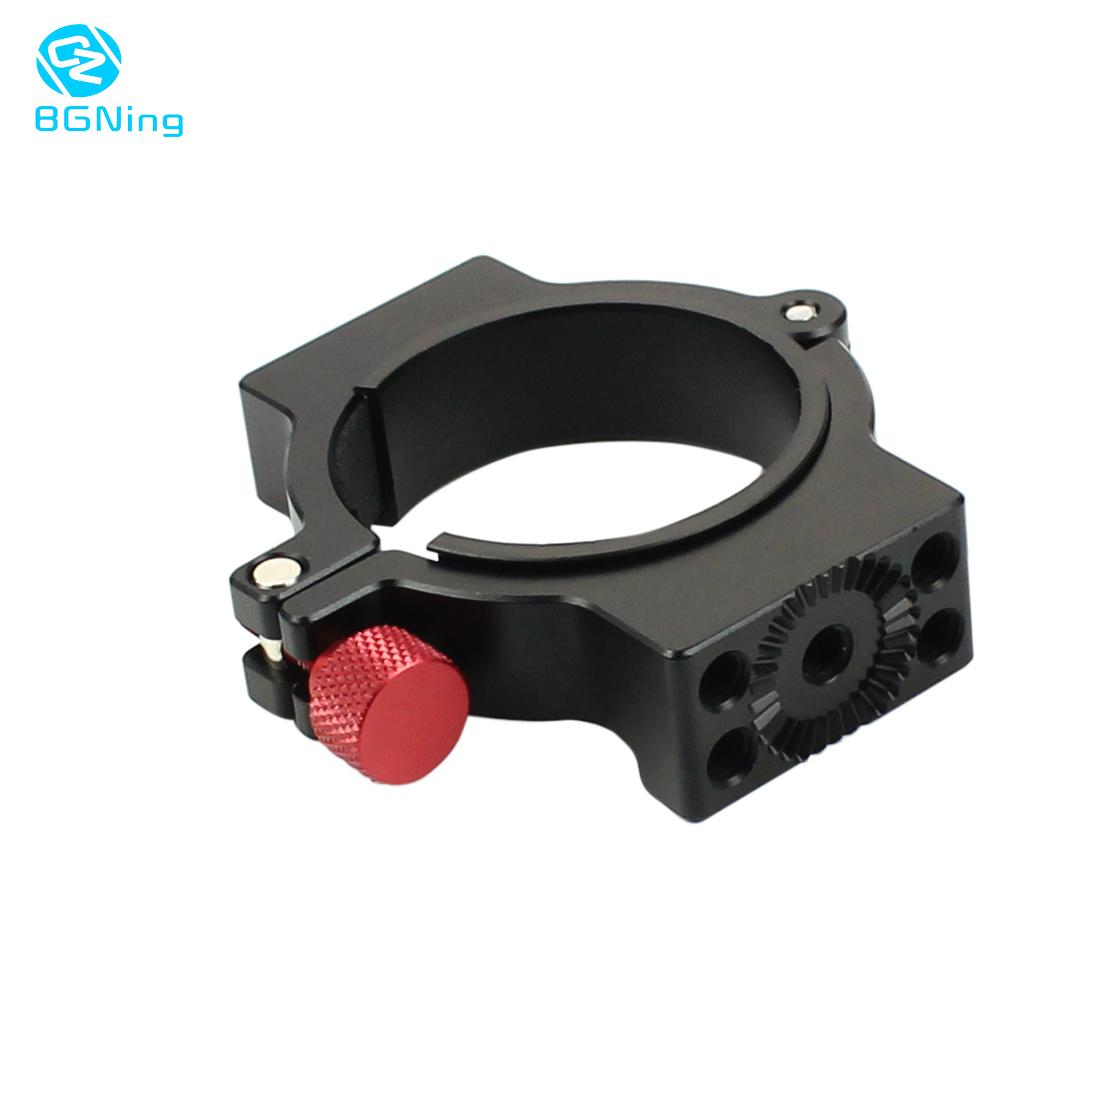 BGNing 1/4 Screw Expansion Ring Extension Microphone LED Video Light Mounting Clip Adapter for Zhiyun Crane 2 Gimbal Stabilizer